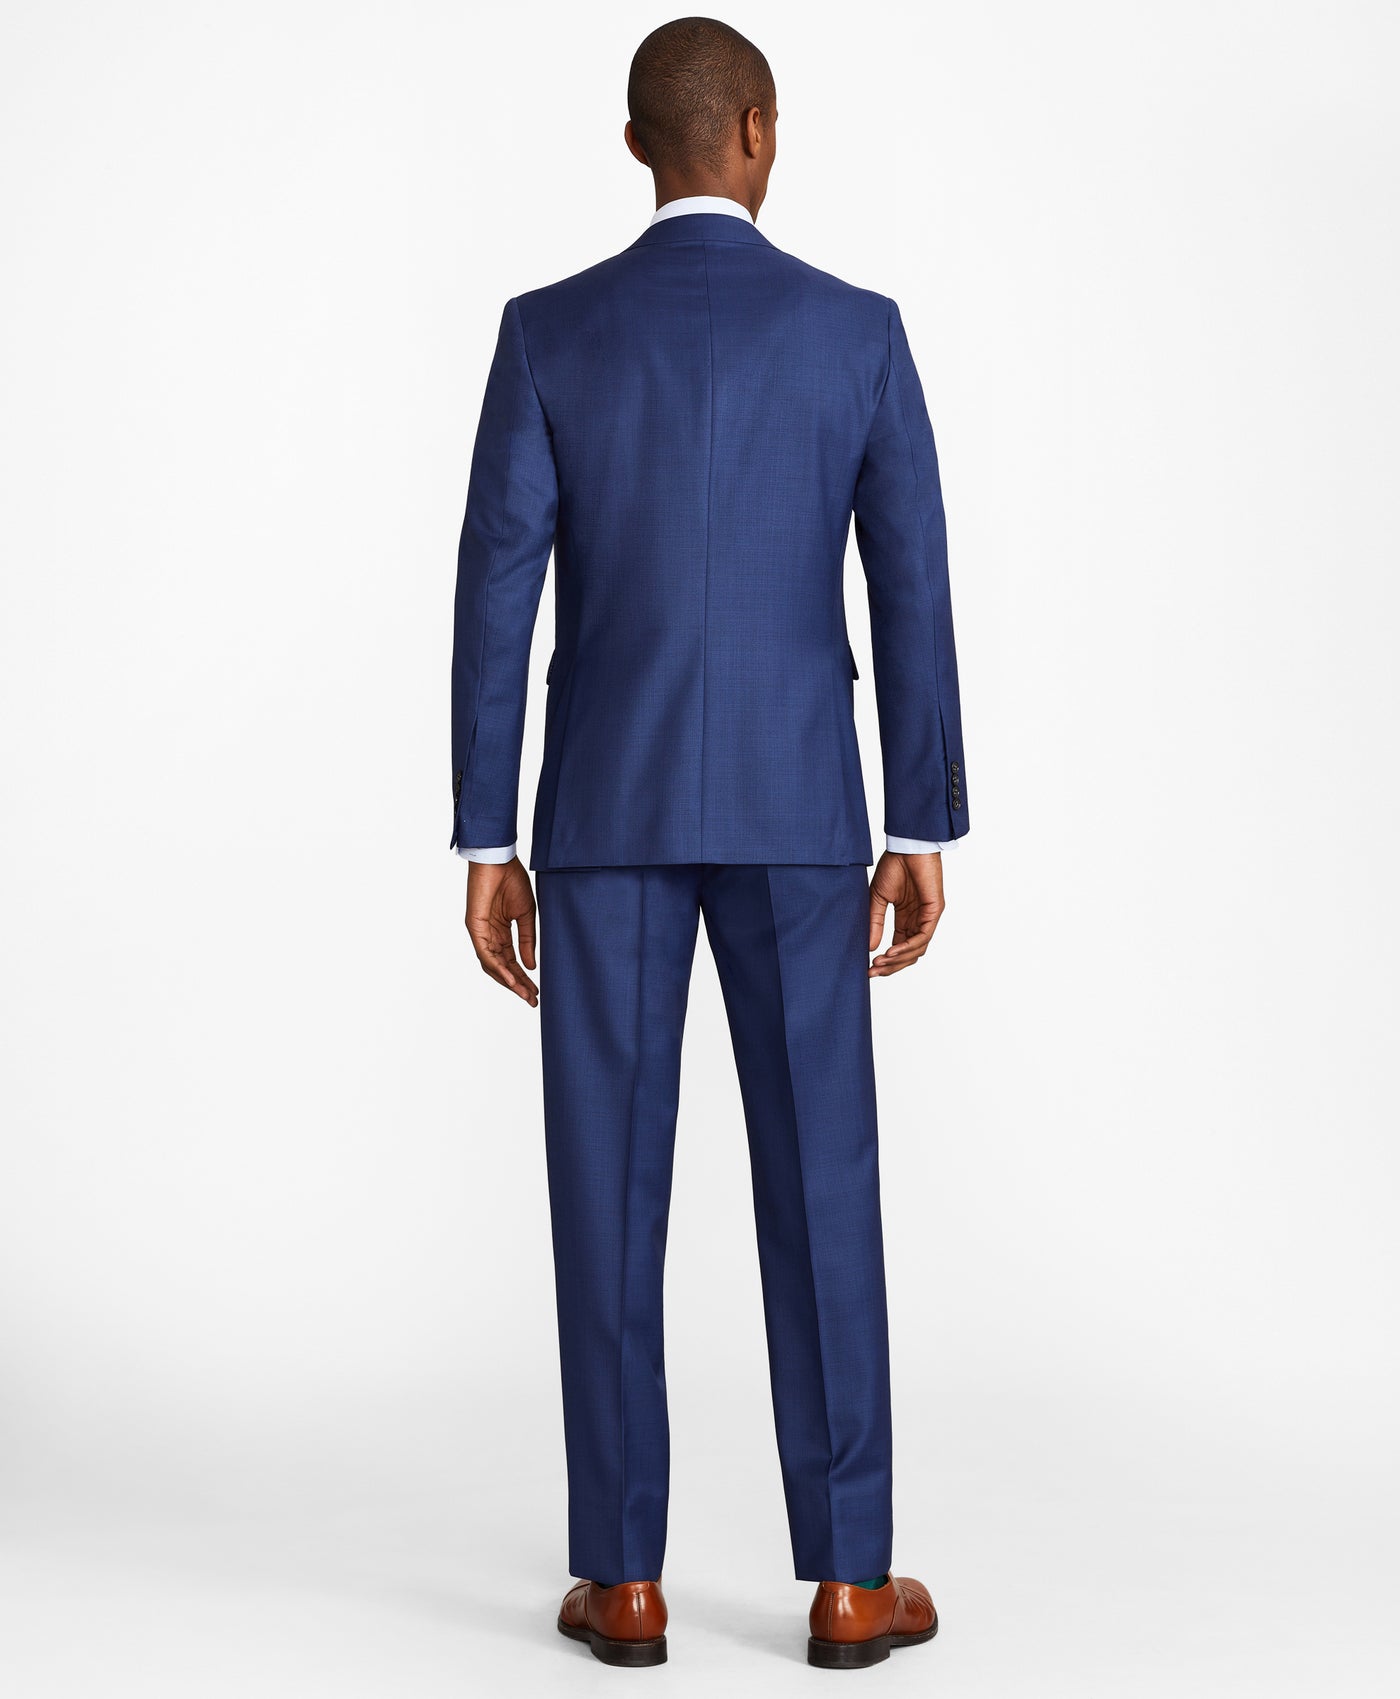 Milano Fit Sharkskin 1818 Suit - Brooks Brothers Canada